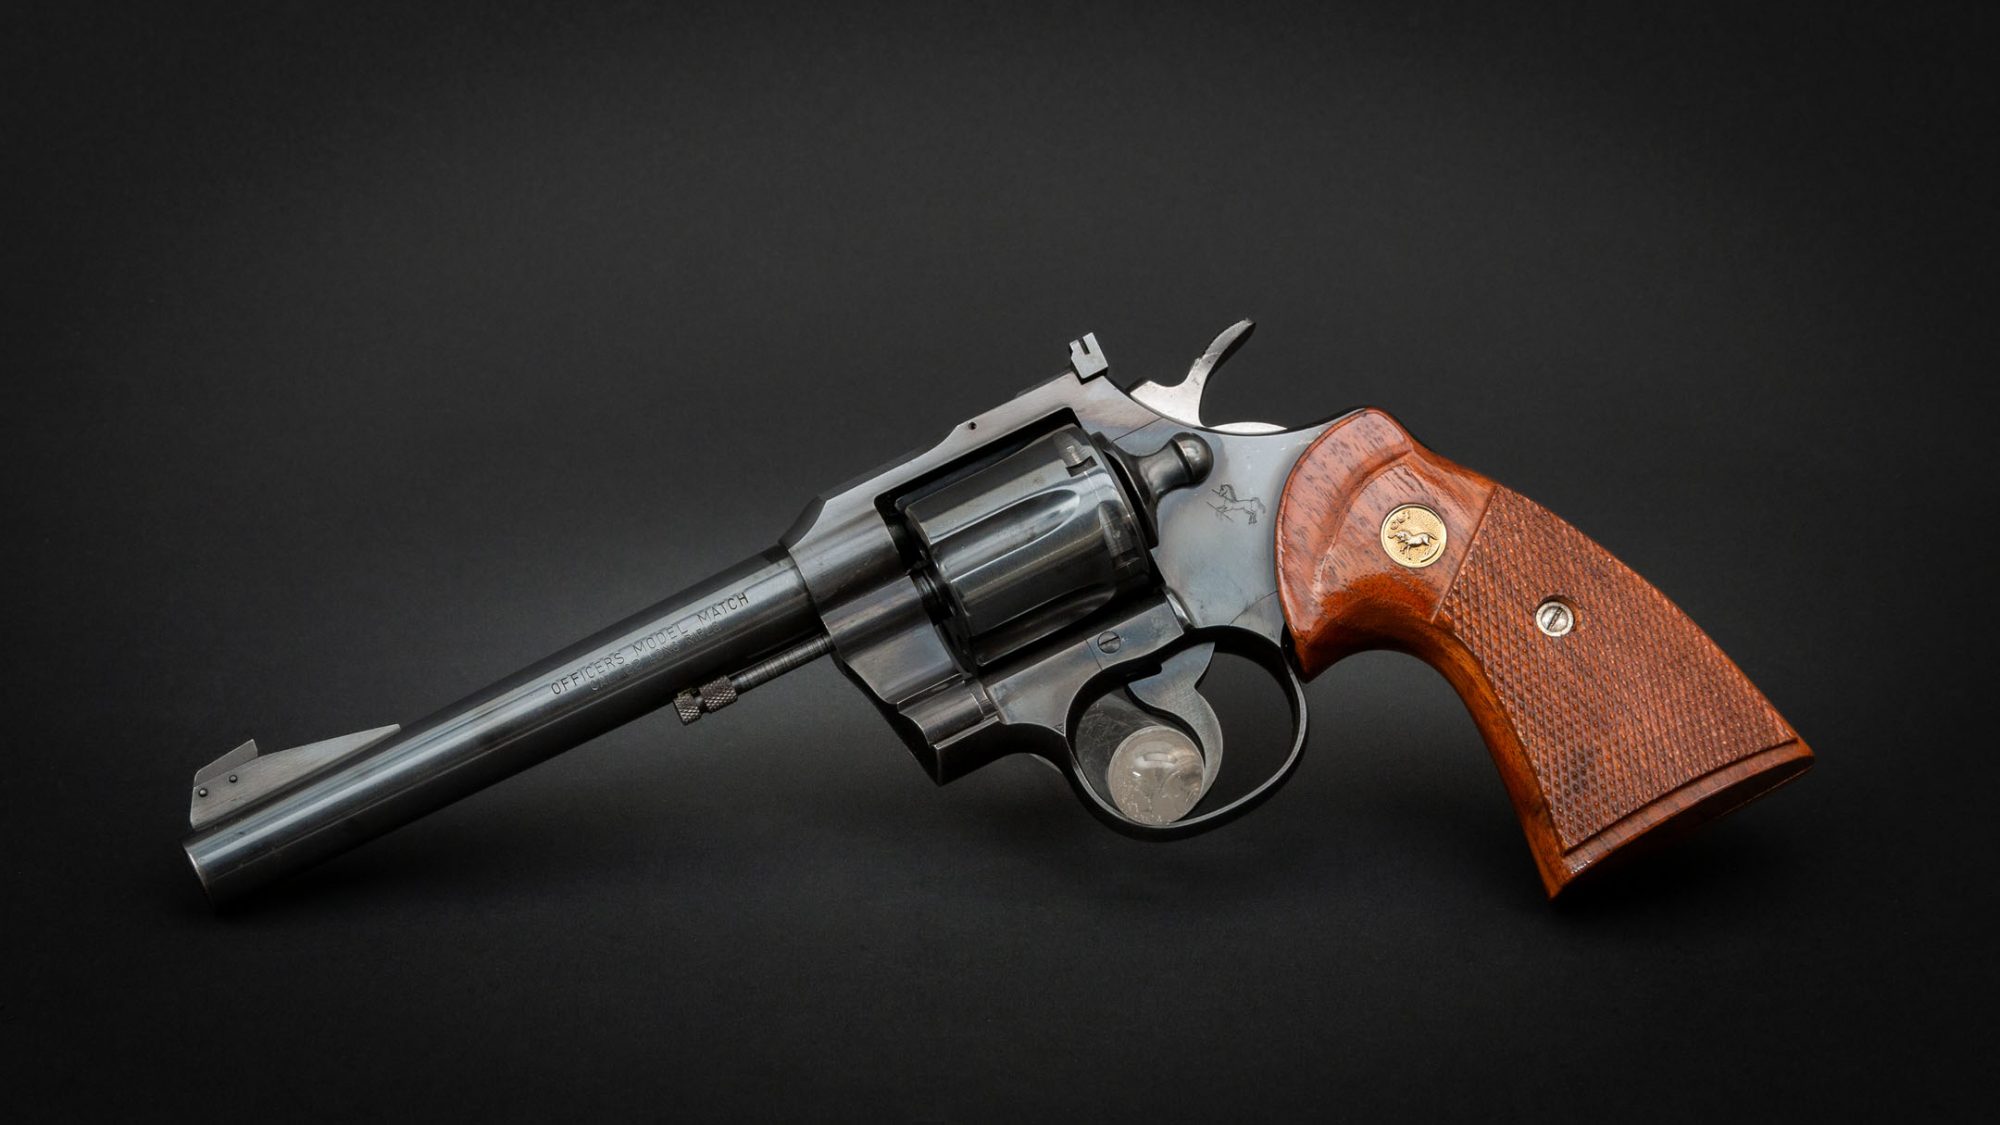 Colt Officers Model Match revolver in .22 Long Rifle, for sale by Turnbull Restoration Co. of Bloomfield, NY